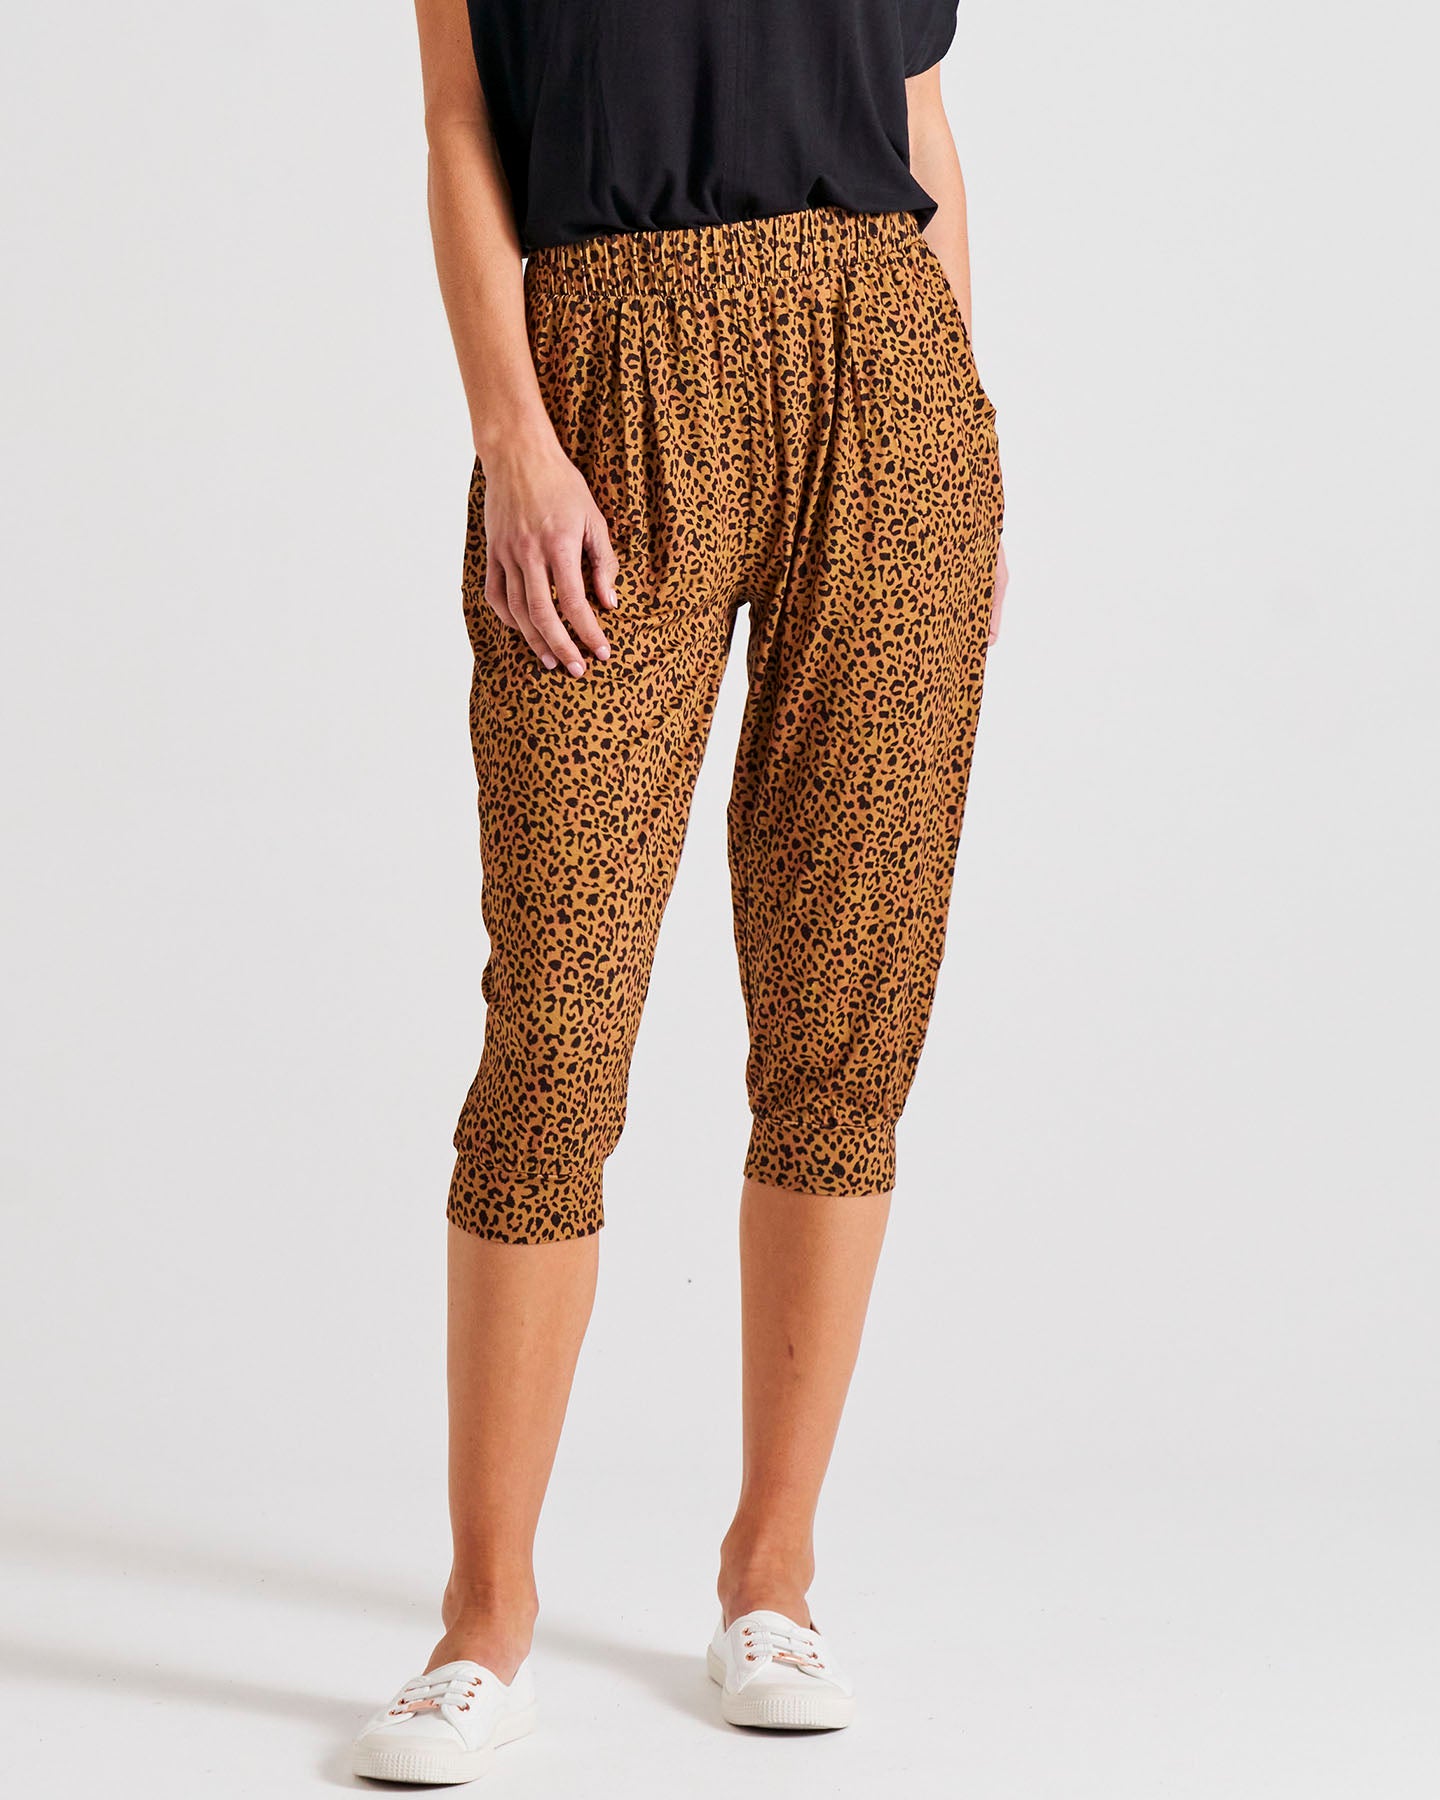 Tokyo Stretchy Mid-Rise Cropped 3/4 Jogger Pant - Wild Leopard Print